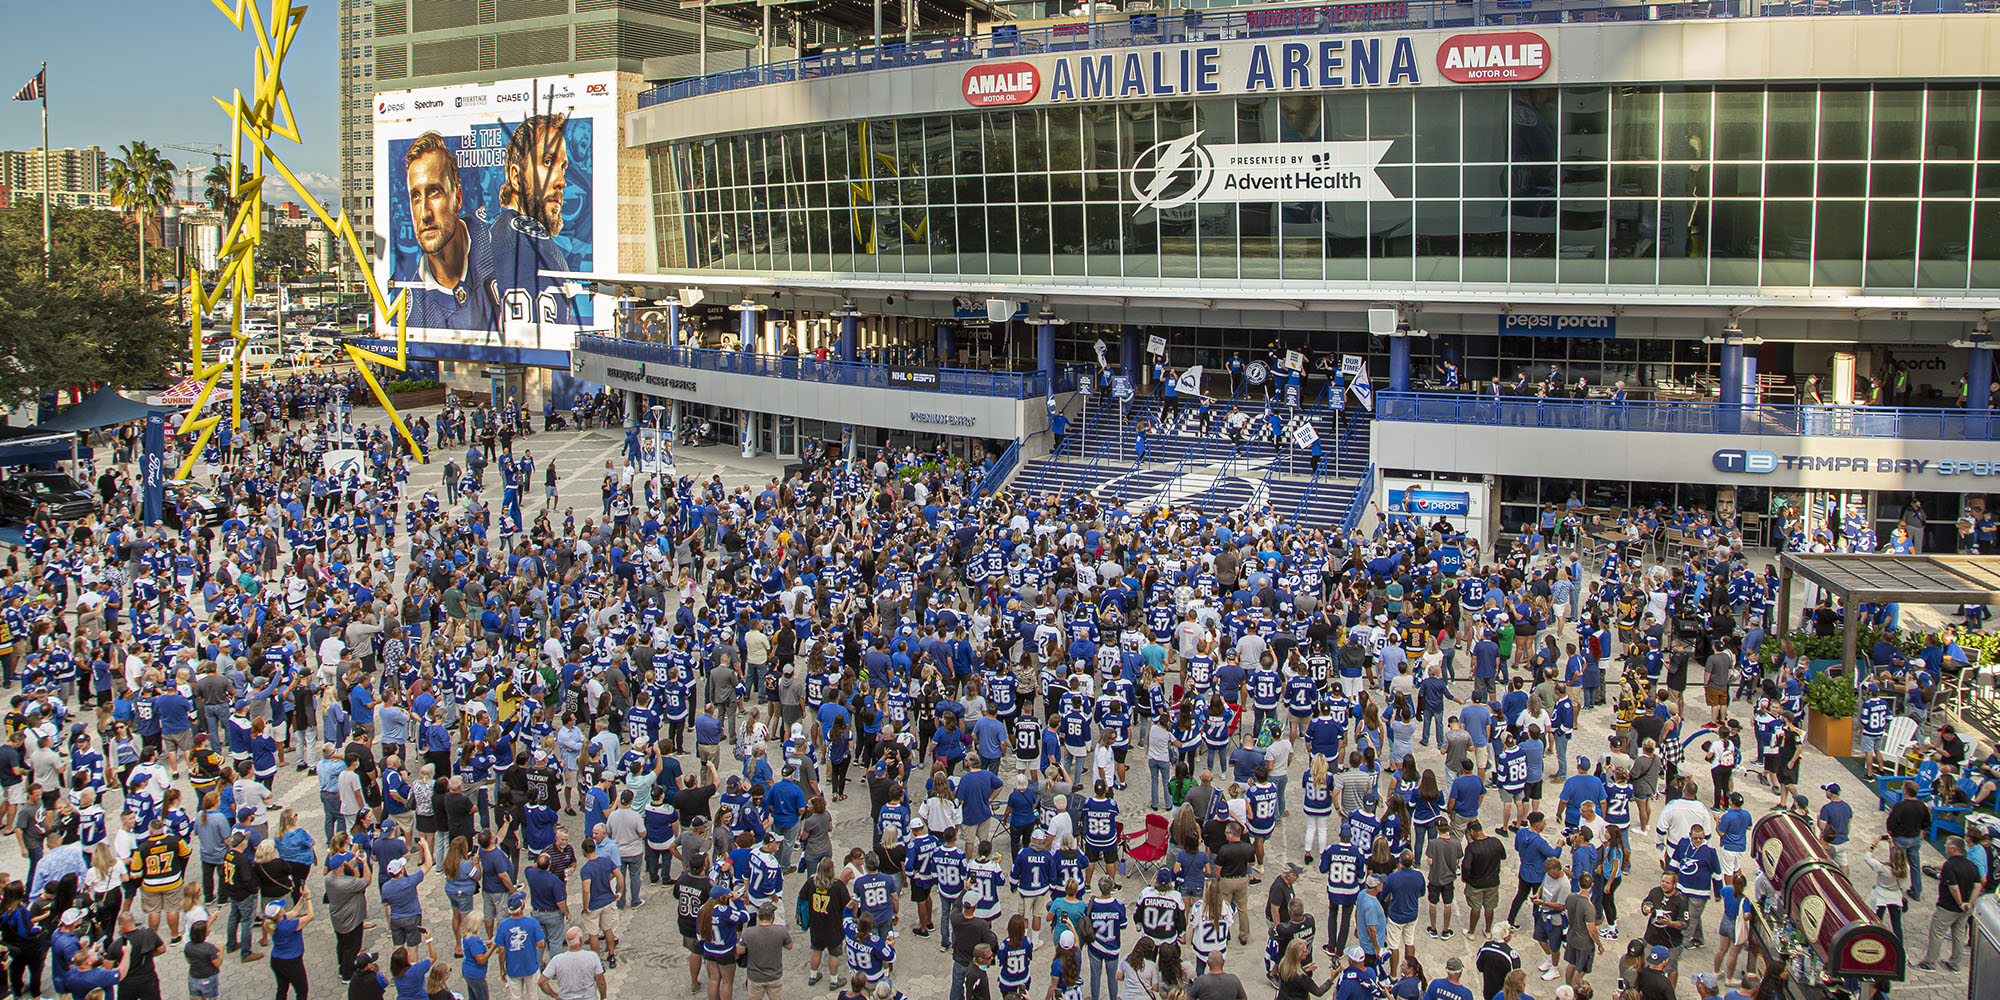 Lightning fans stand outside the Amalie Arena in their gear.